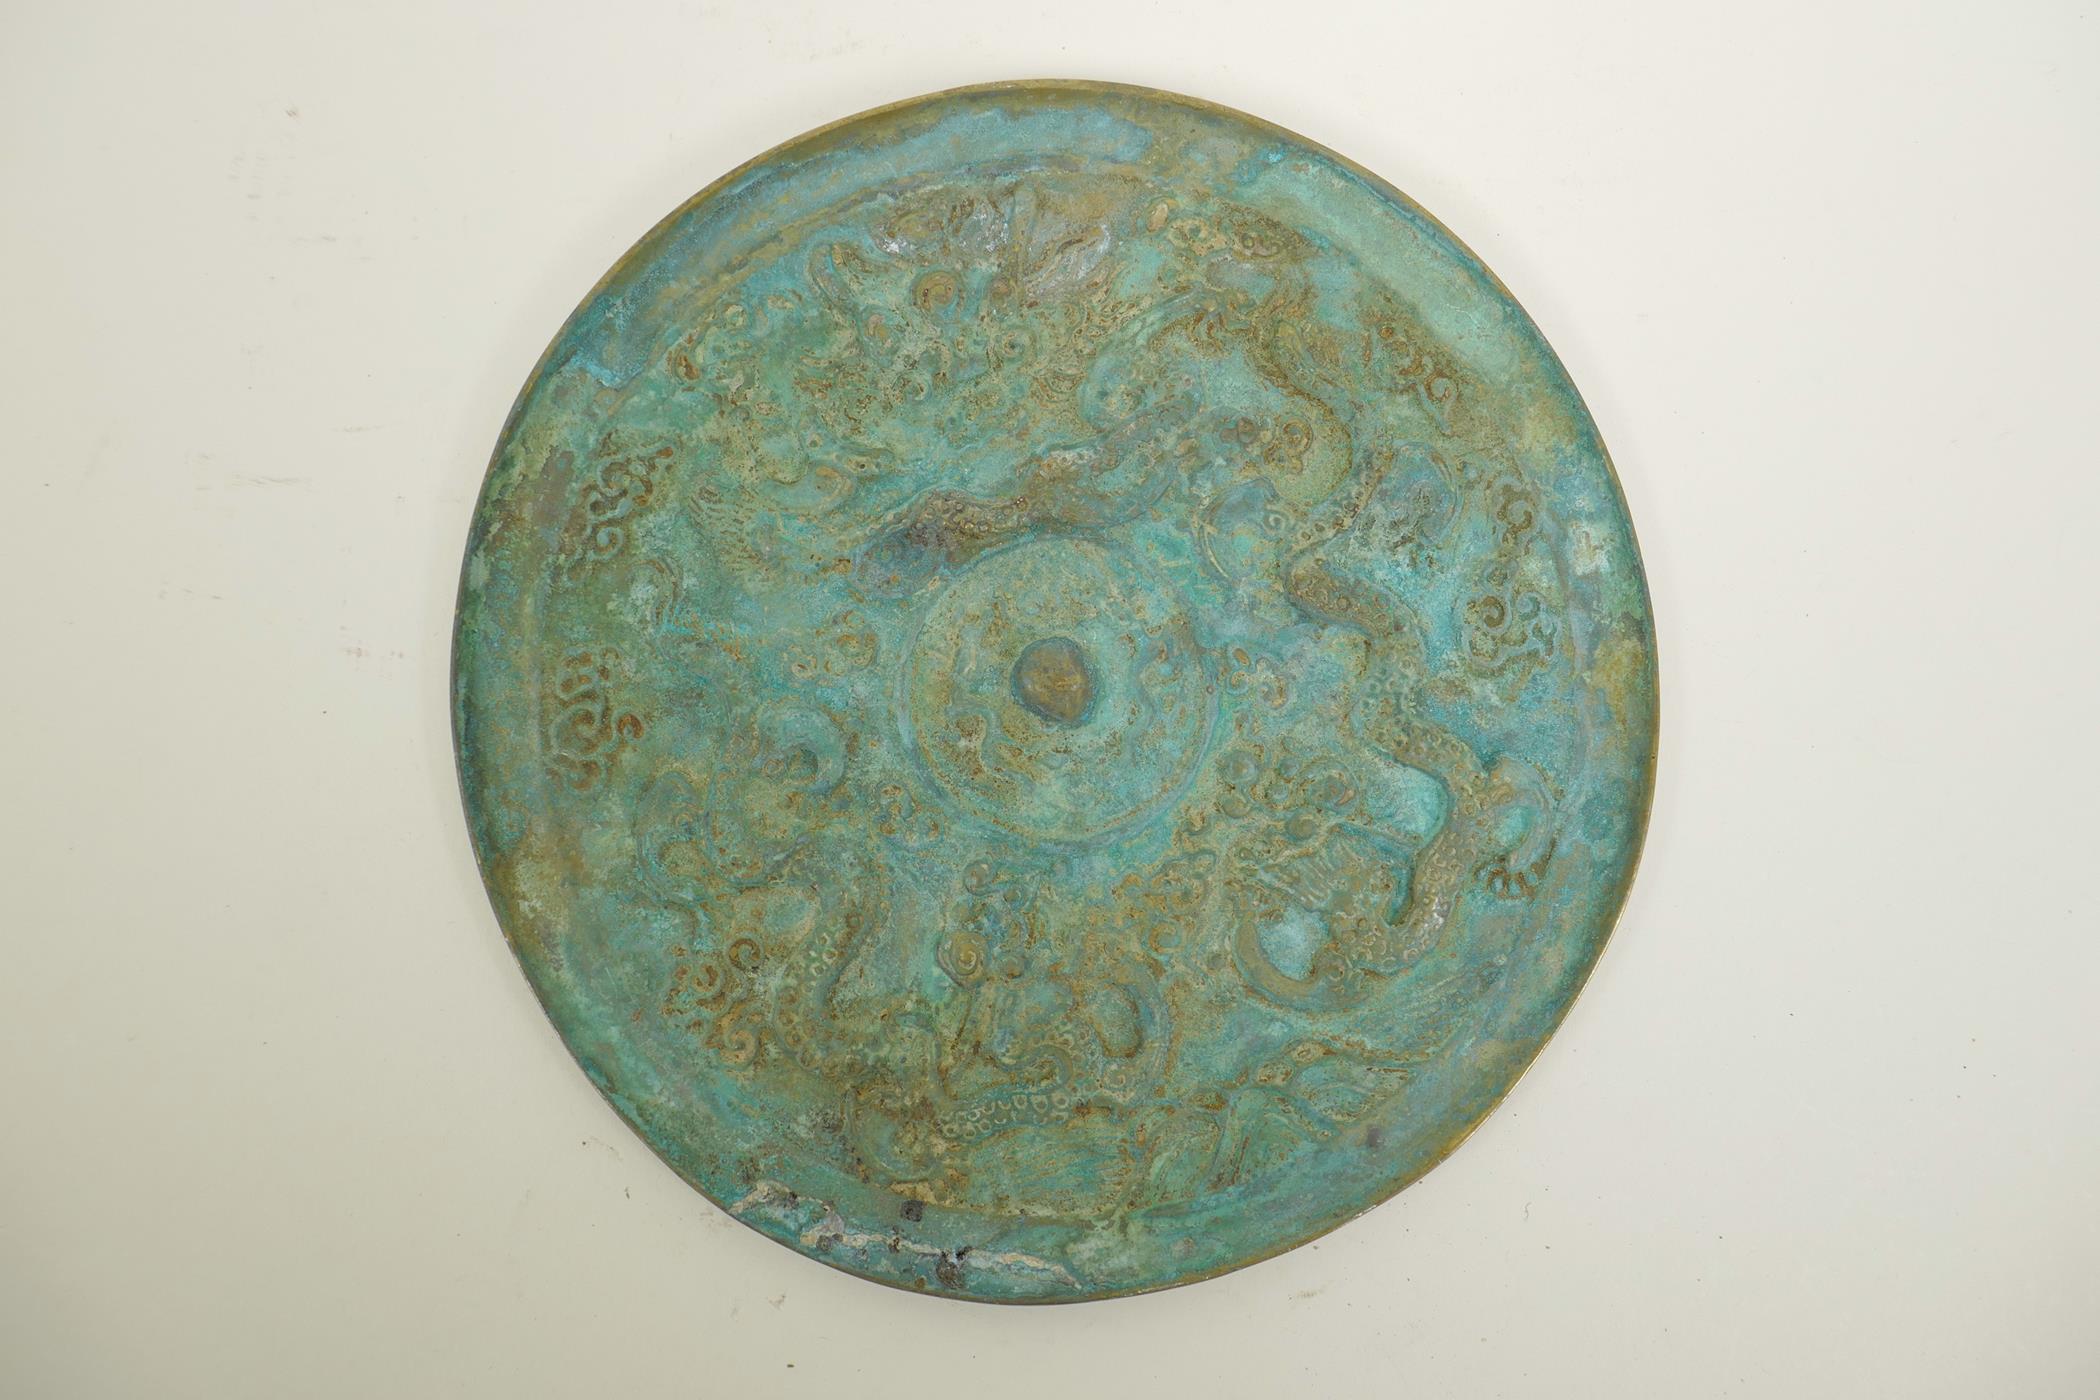 A Chinese bronze circular plaque with raised dragon and character decoration, 9½" diameter - Image 2 of 2